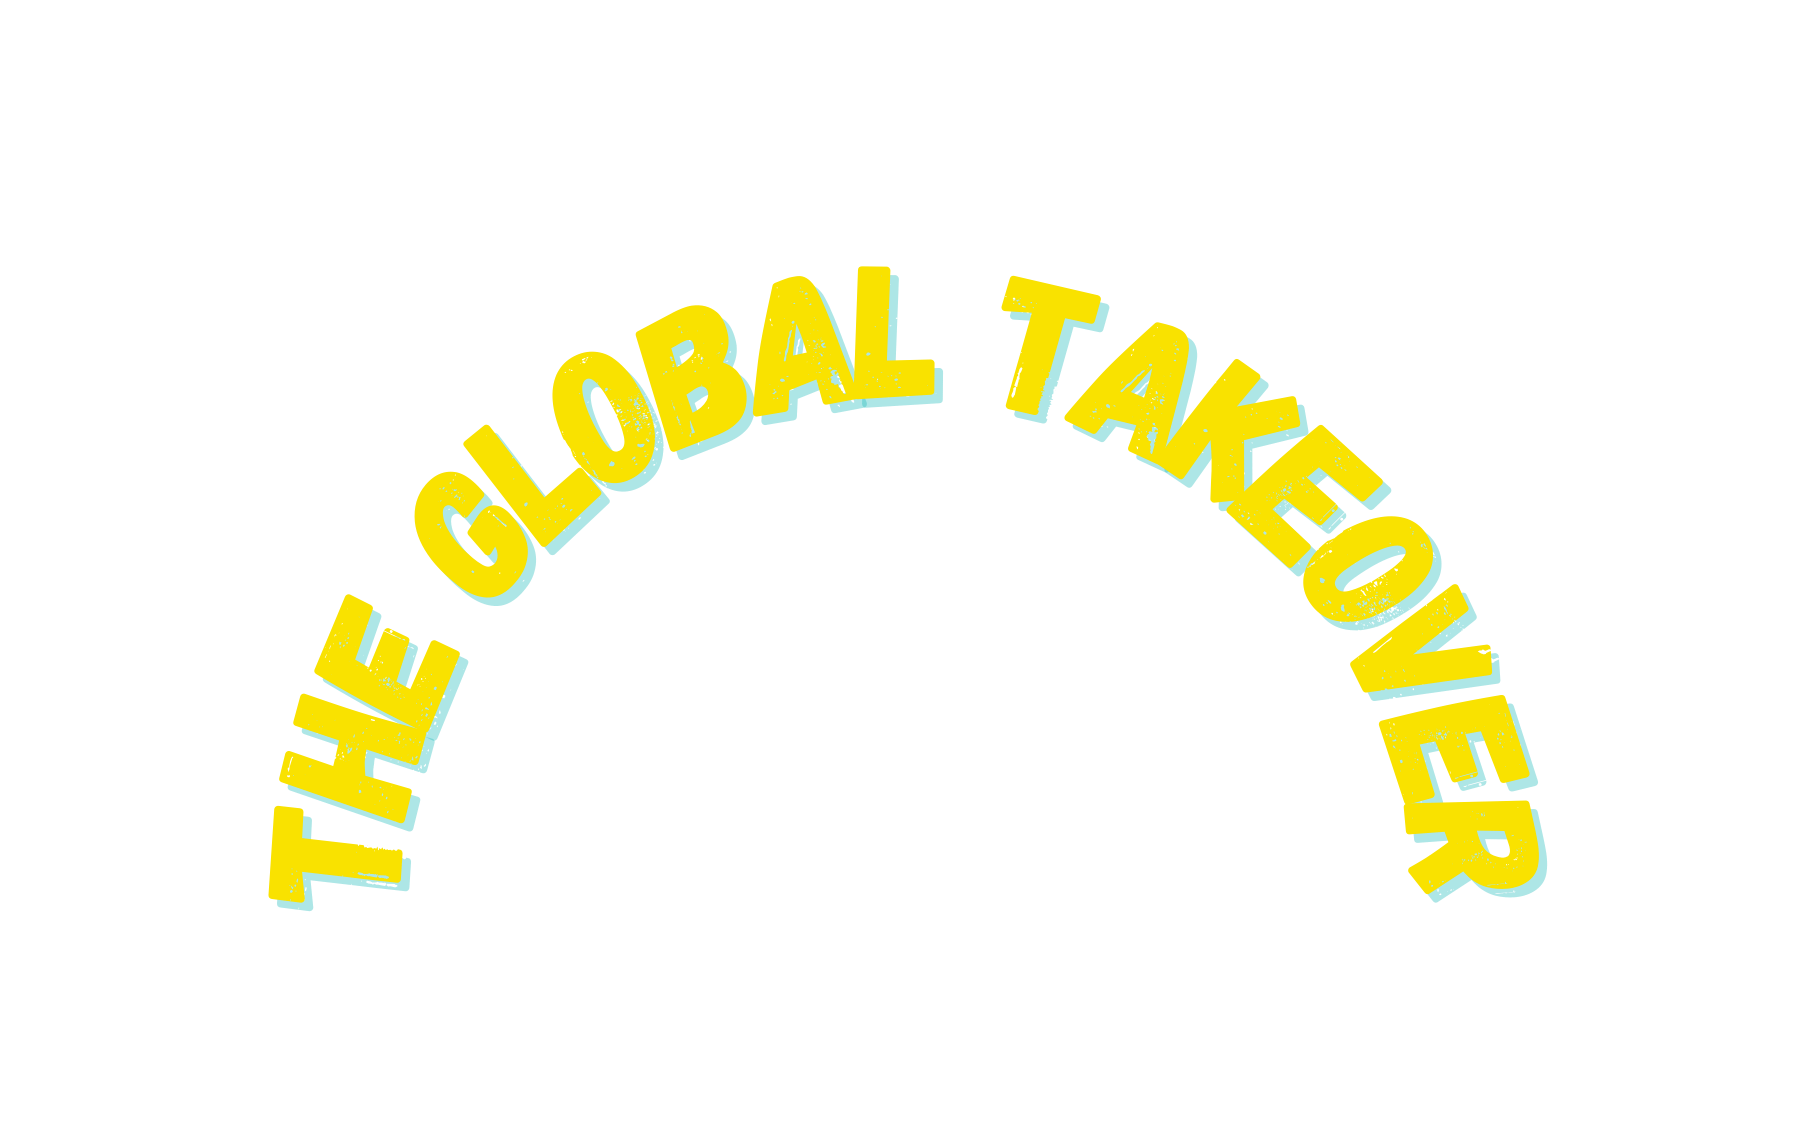 THE GLOBAL TAKEOVER